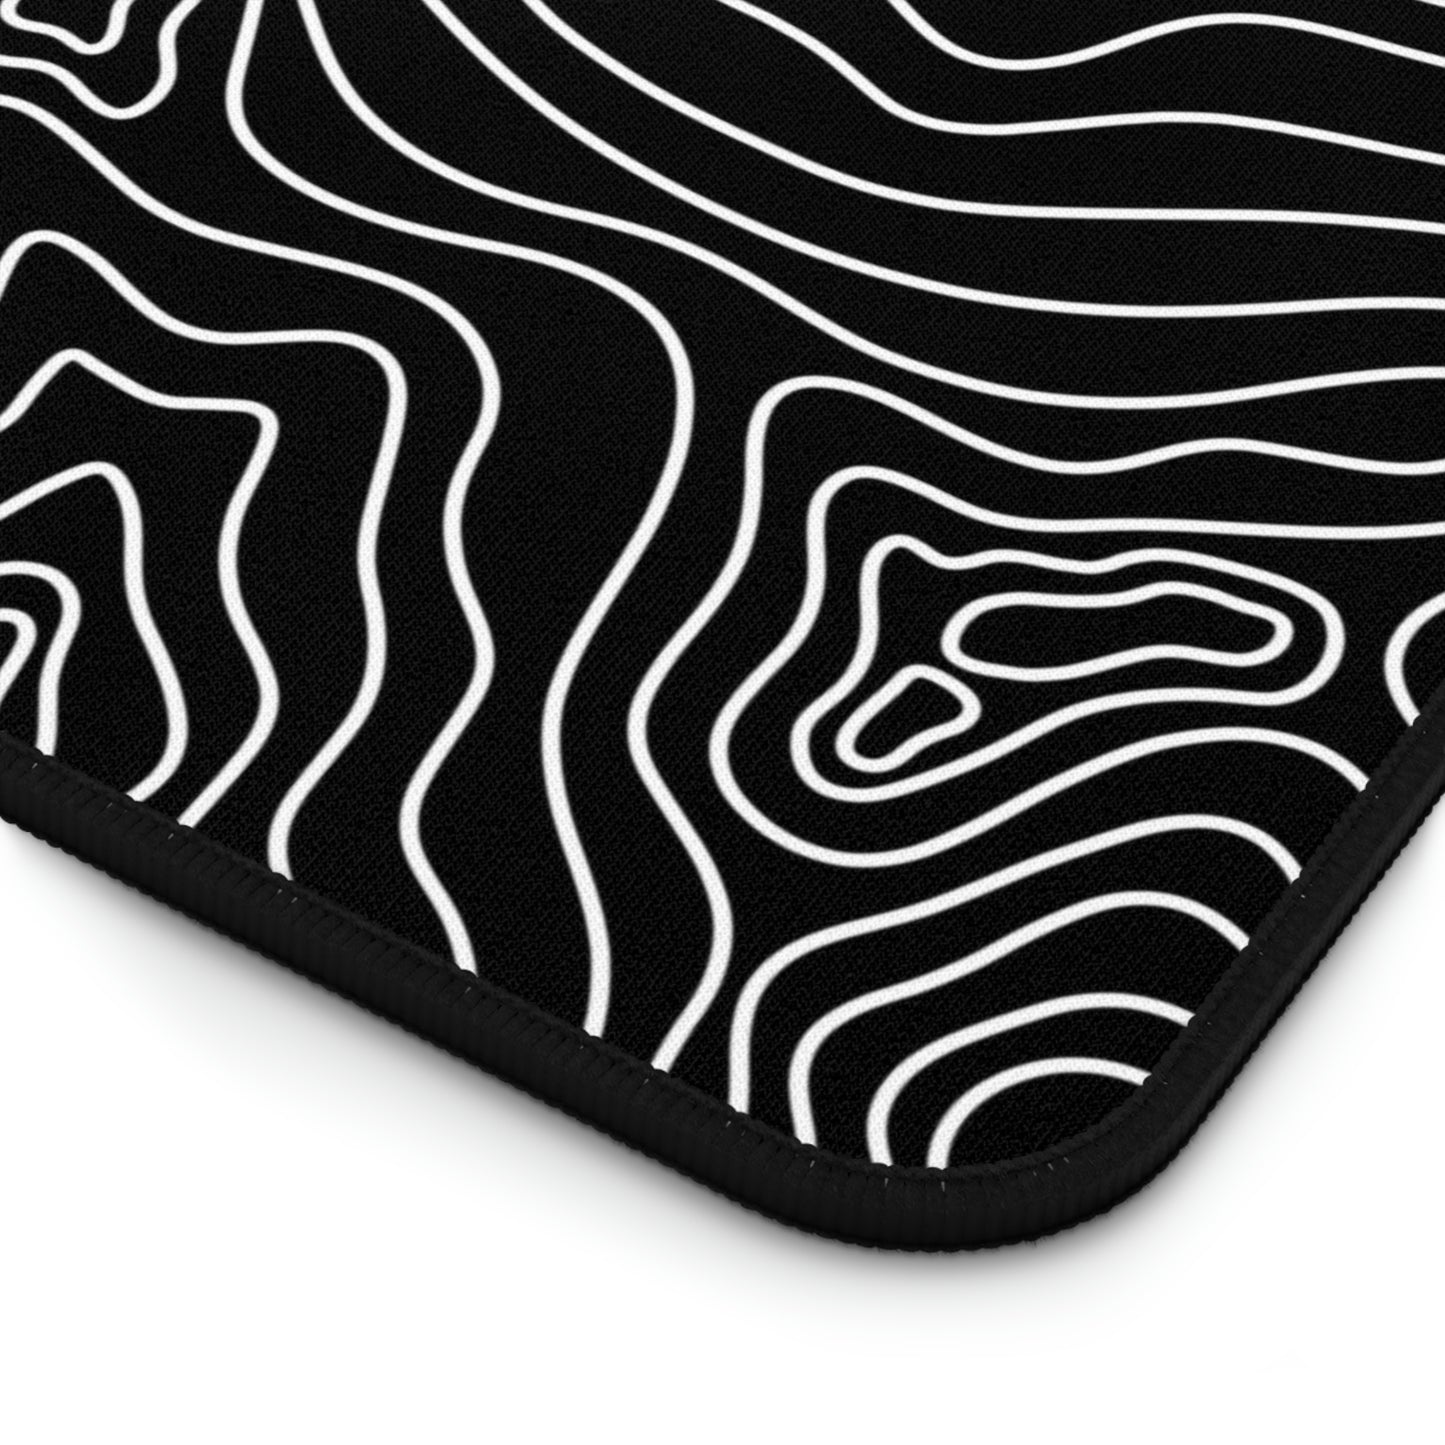 The bottom right corner of a 12" x 22" black desk mat with white topographic lines.